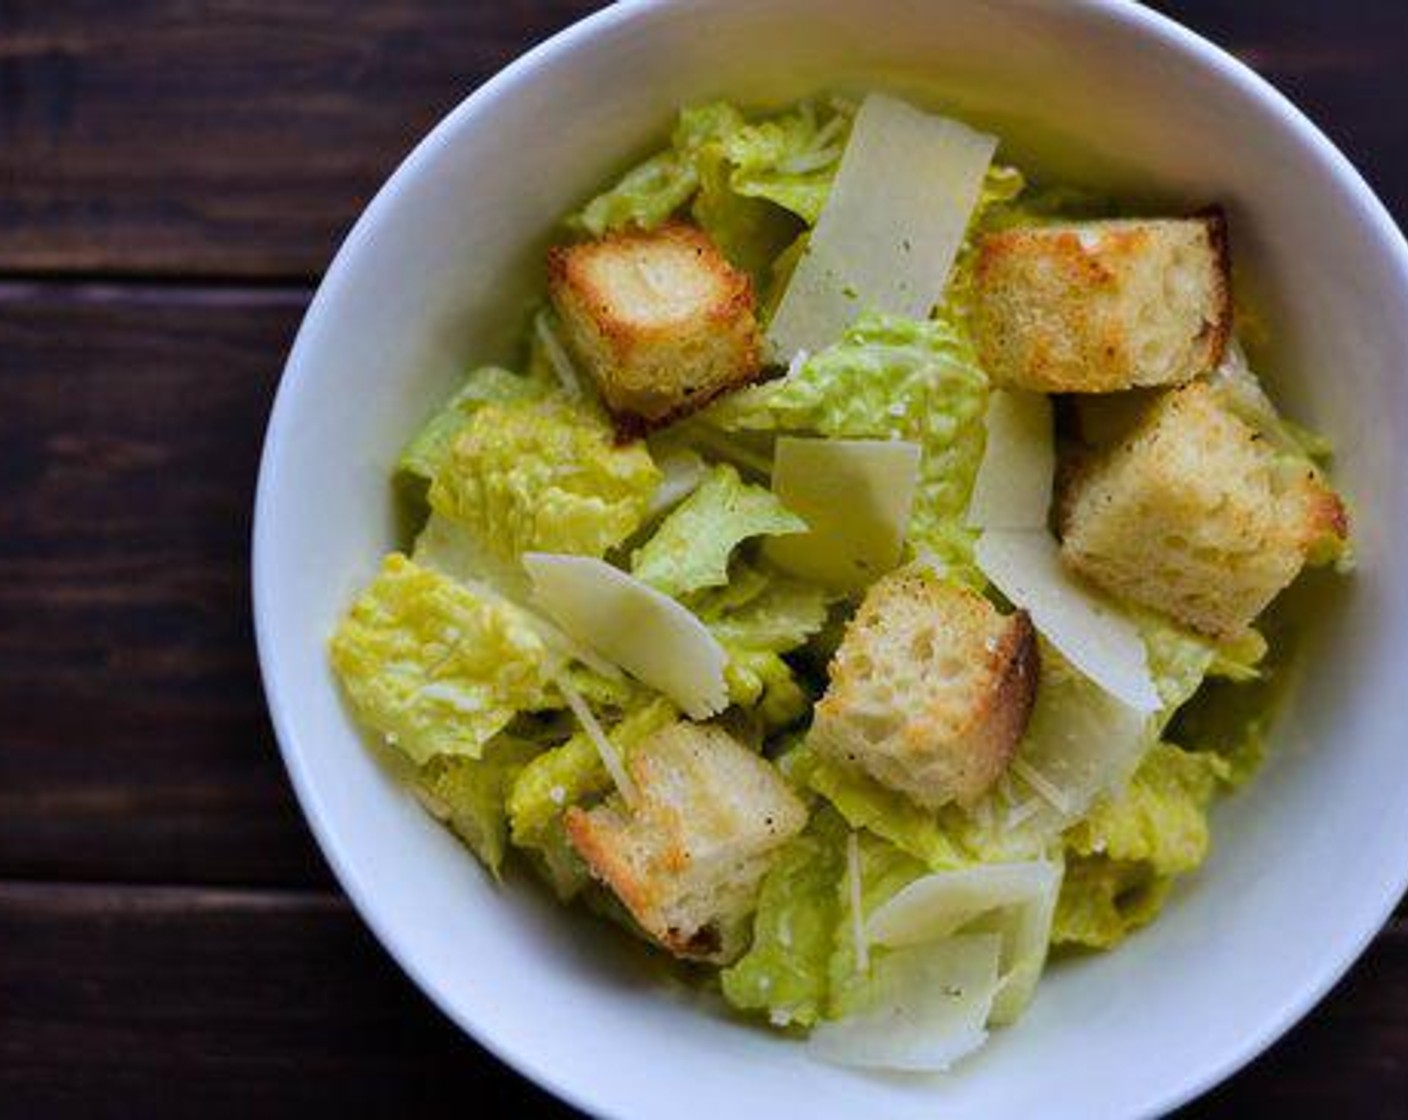 step 5 Toss in Romaine Lettuce (1 head) with the dressing. Garnish with croutons, Parmesan Cheese (to taste) and Ground Black Pepper (1 dash).